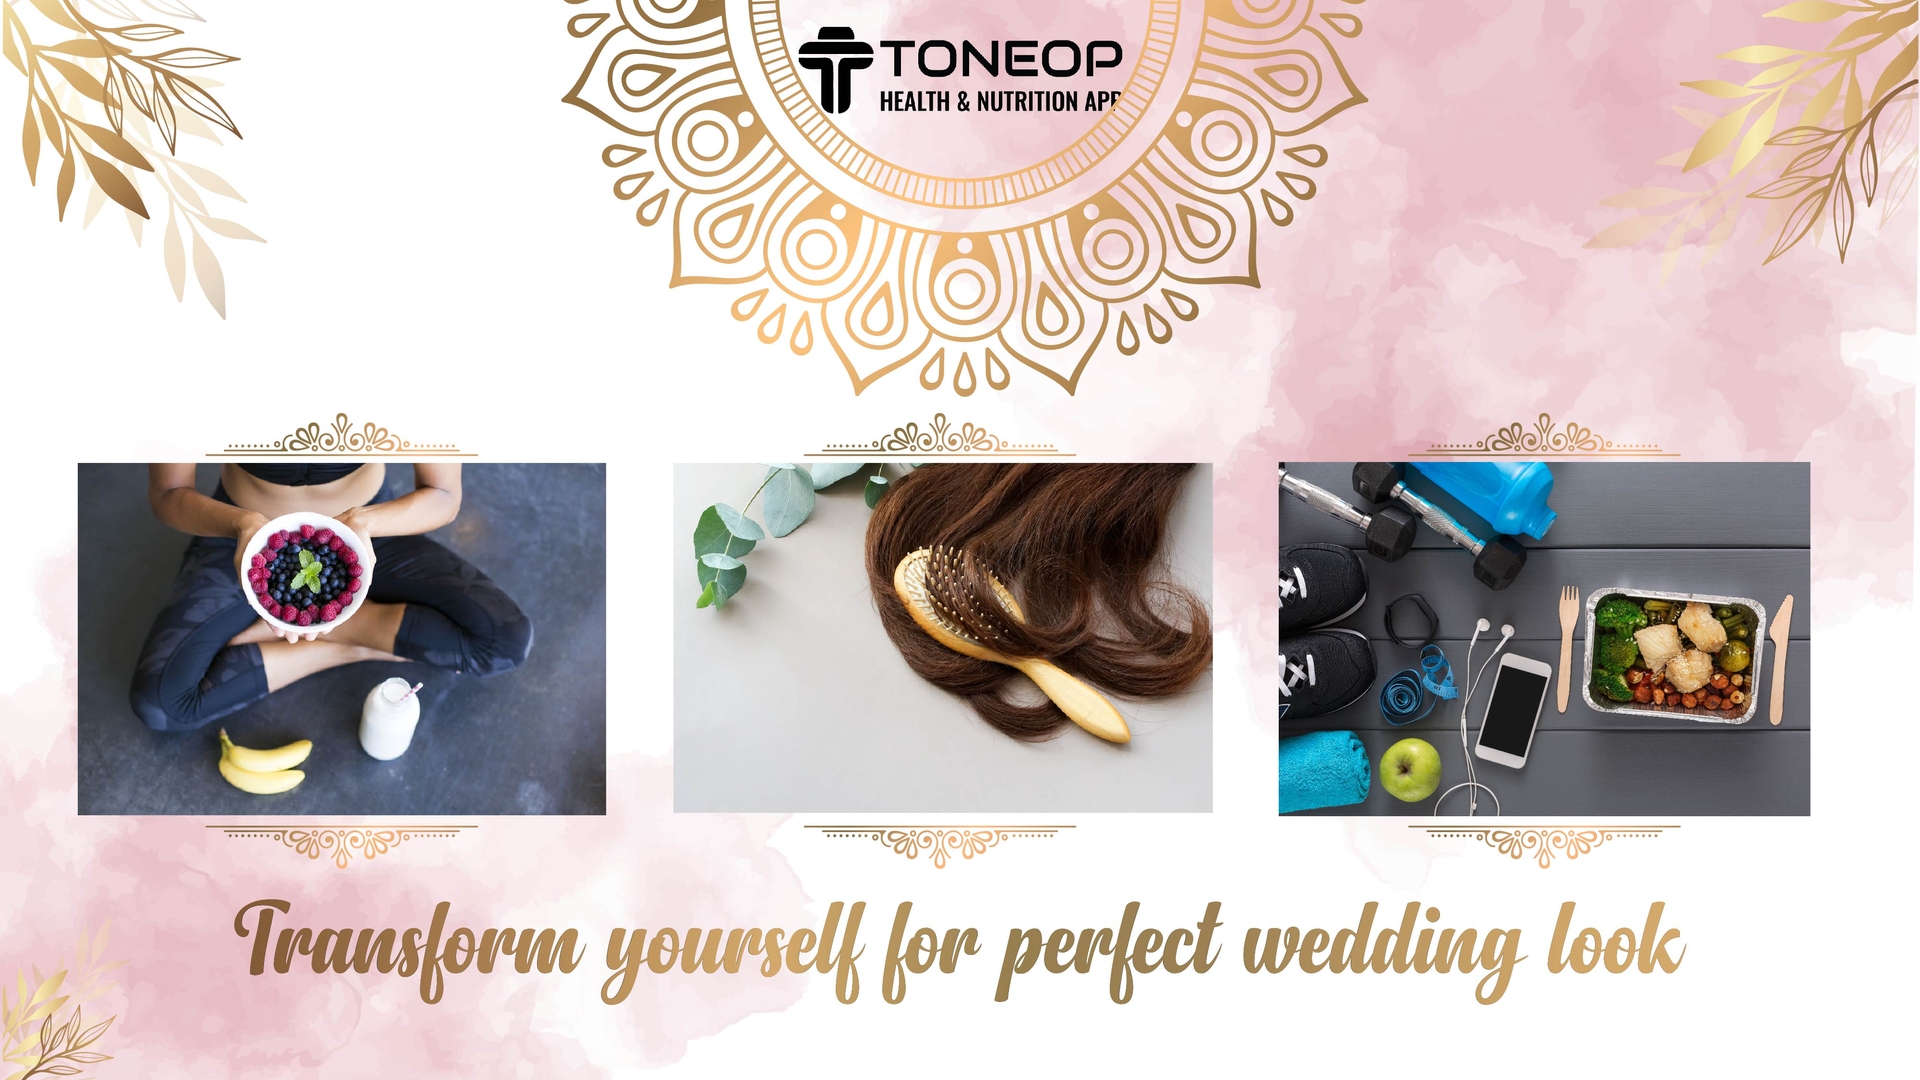 10 Body Transformation Tips To Be Wedding-Ready